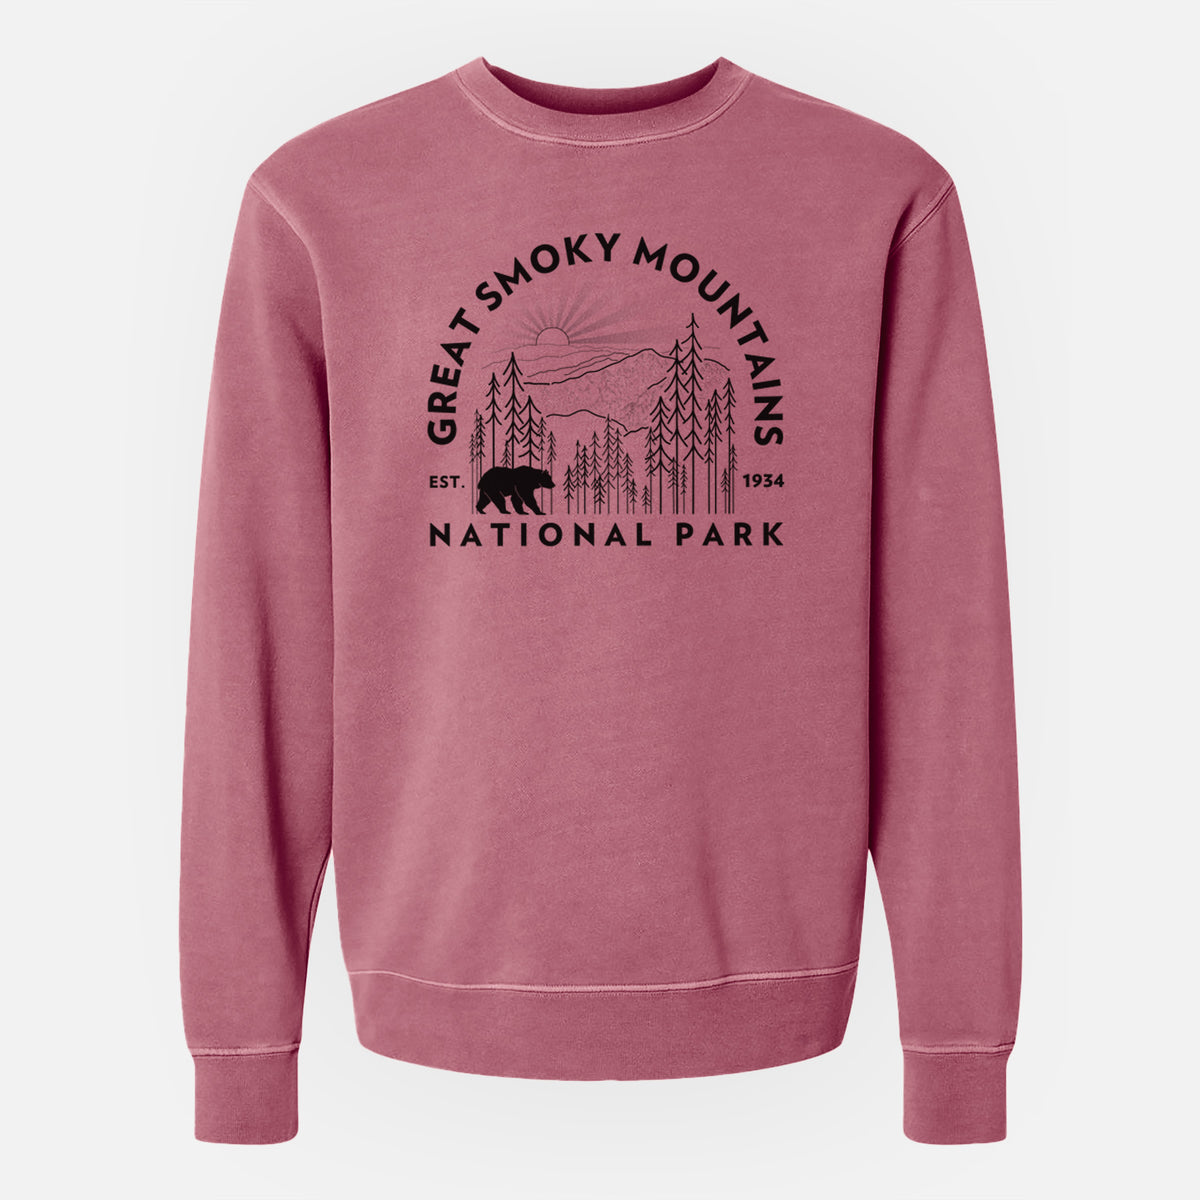 Great Smoky Mountains National Park - Unisex Pigment Dyed Crew Sweatshirt